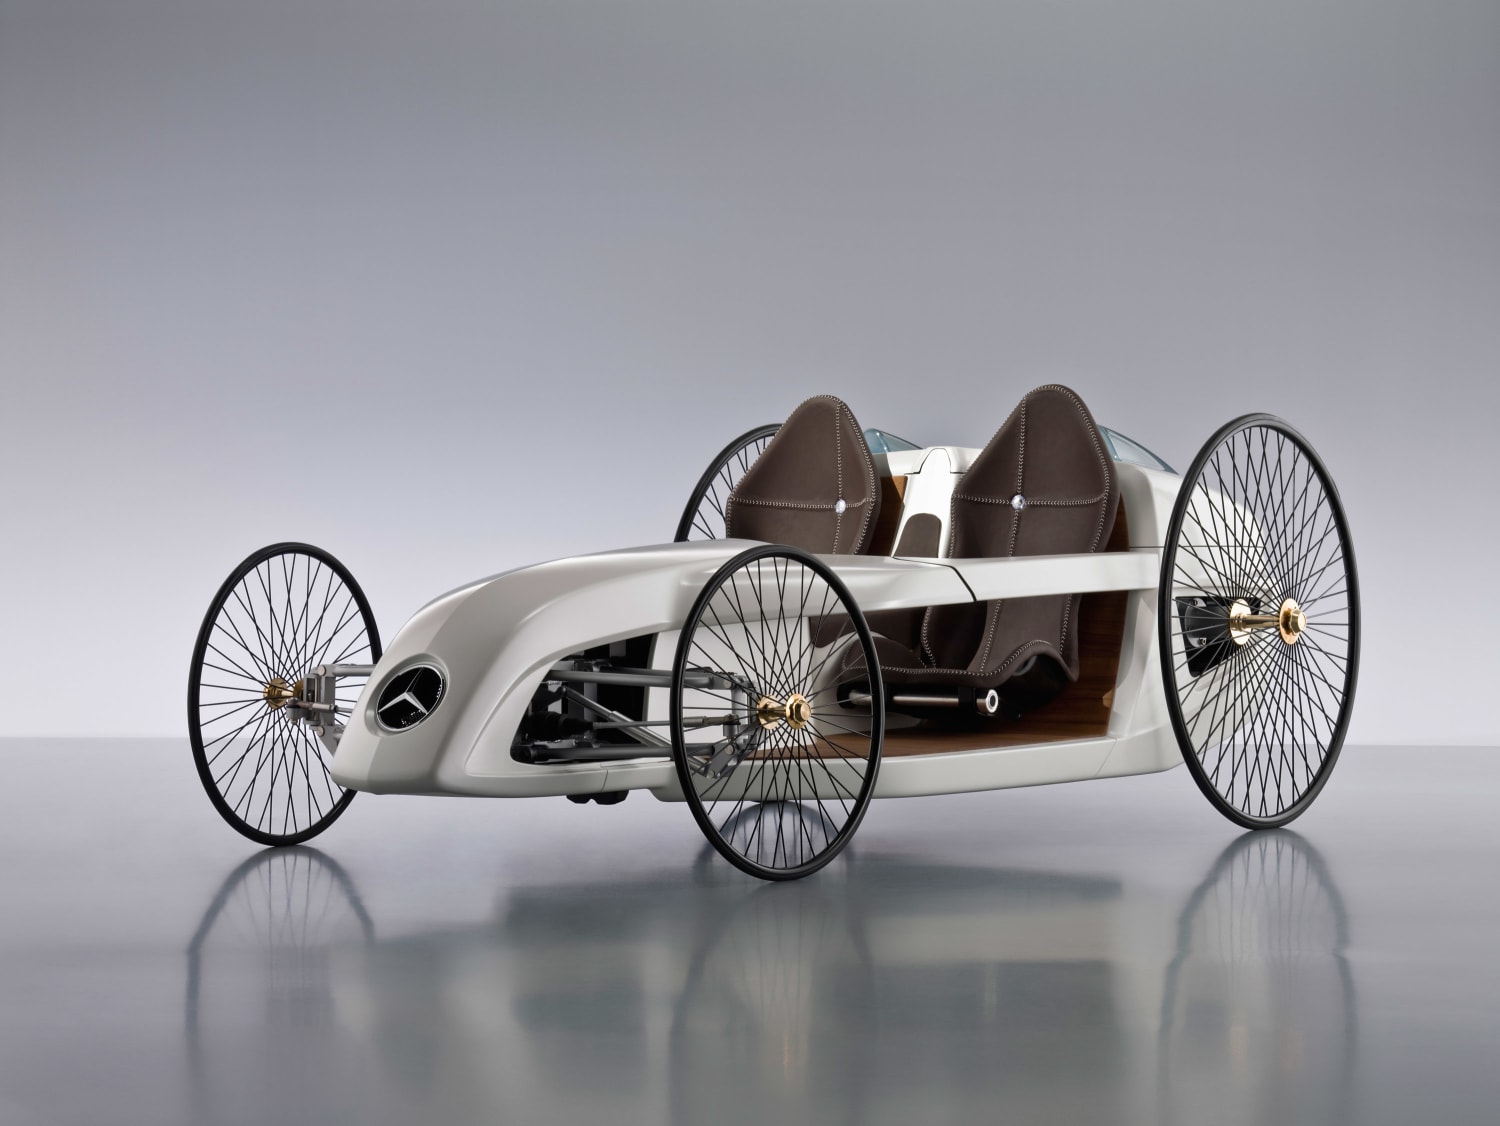 2009 Mercedes-Benz F-CELL Roadster